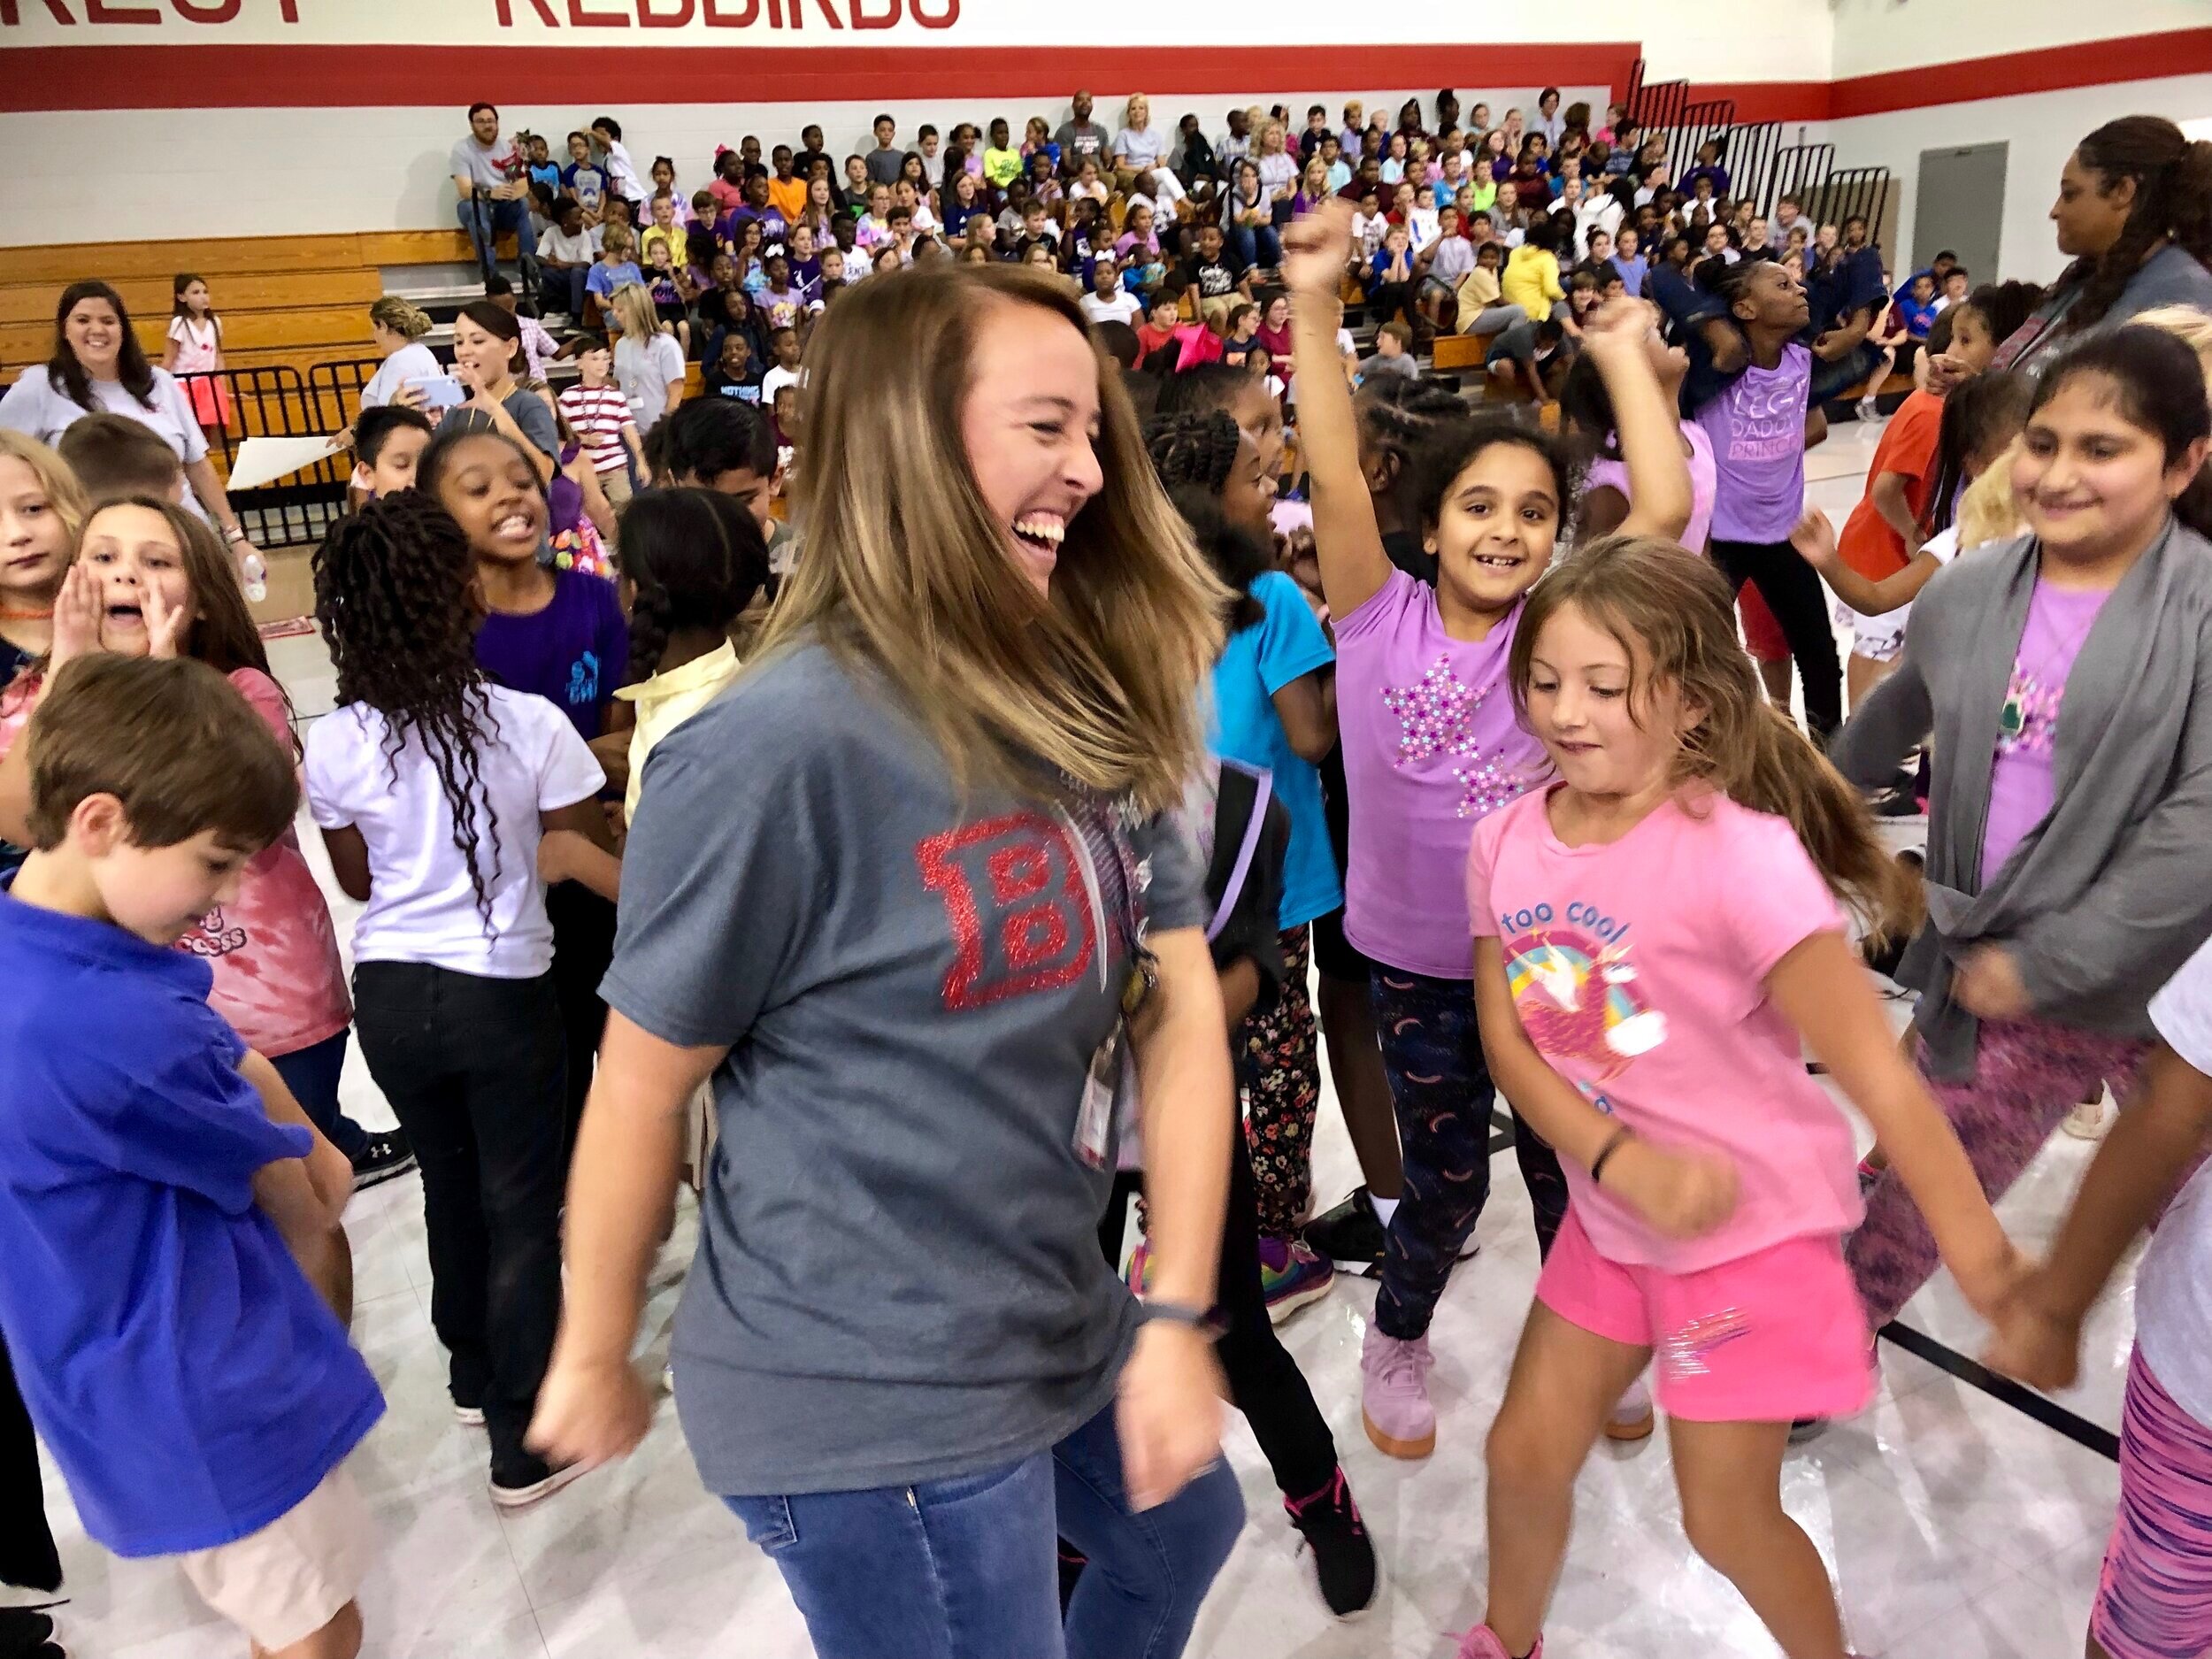 Teachers and students enjoy a dance party